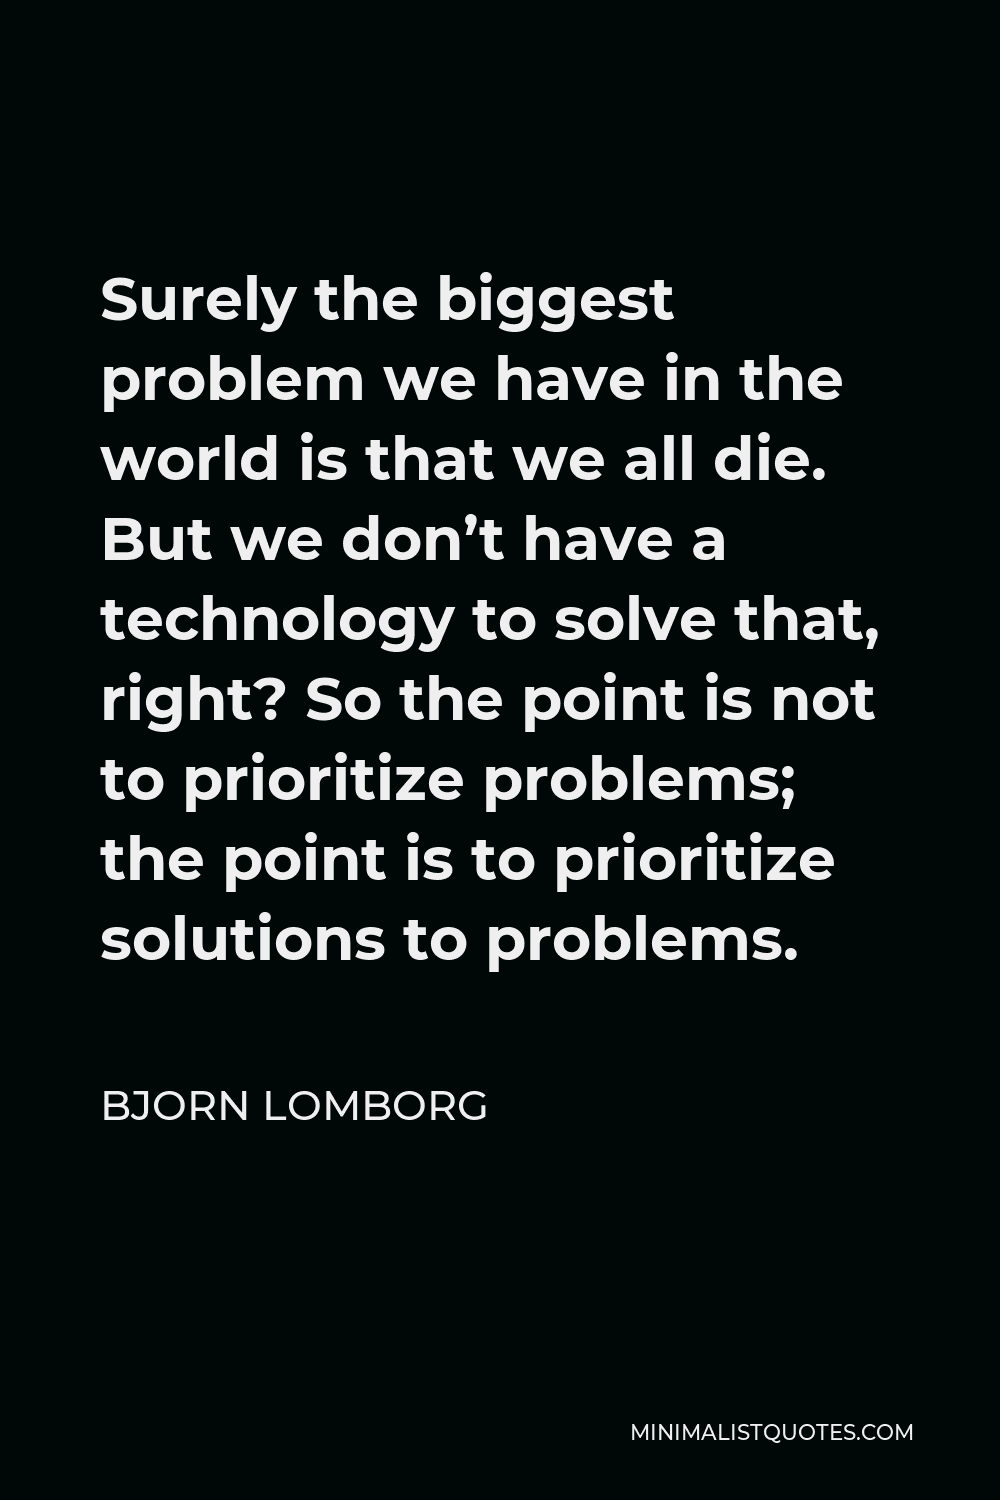 Bjorn Lomborg Quote - Surely the biggest problem we have in the world is that we all die. But we don’t have a technology to solve that, right? So the point is not to prioritize problems; the point is to prioritize solutions to problems.